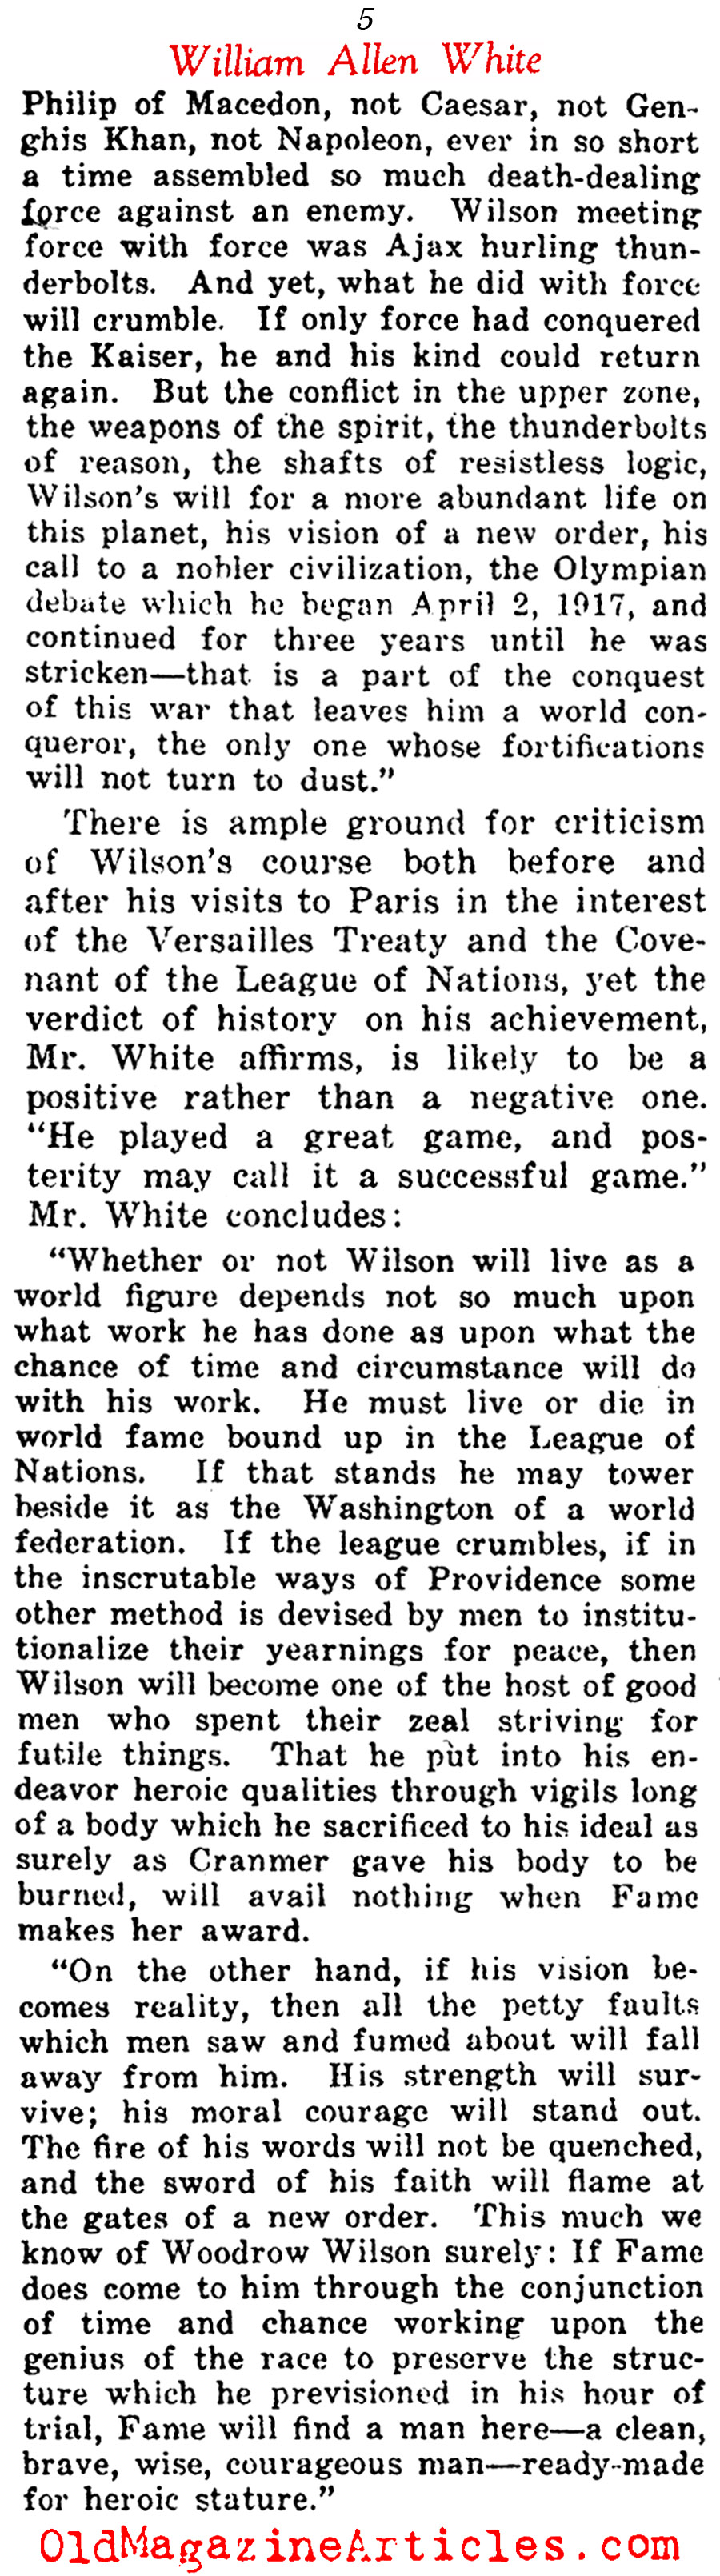 The Life of Woodrow Wilson  (Current Opinion, 1925)